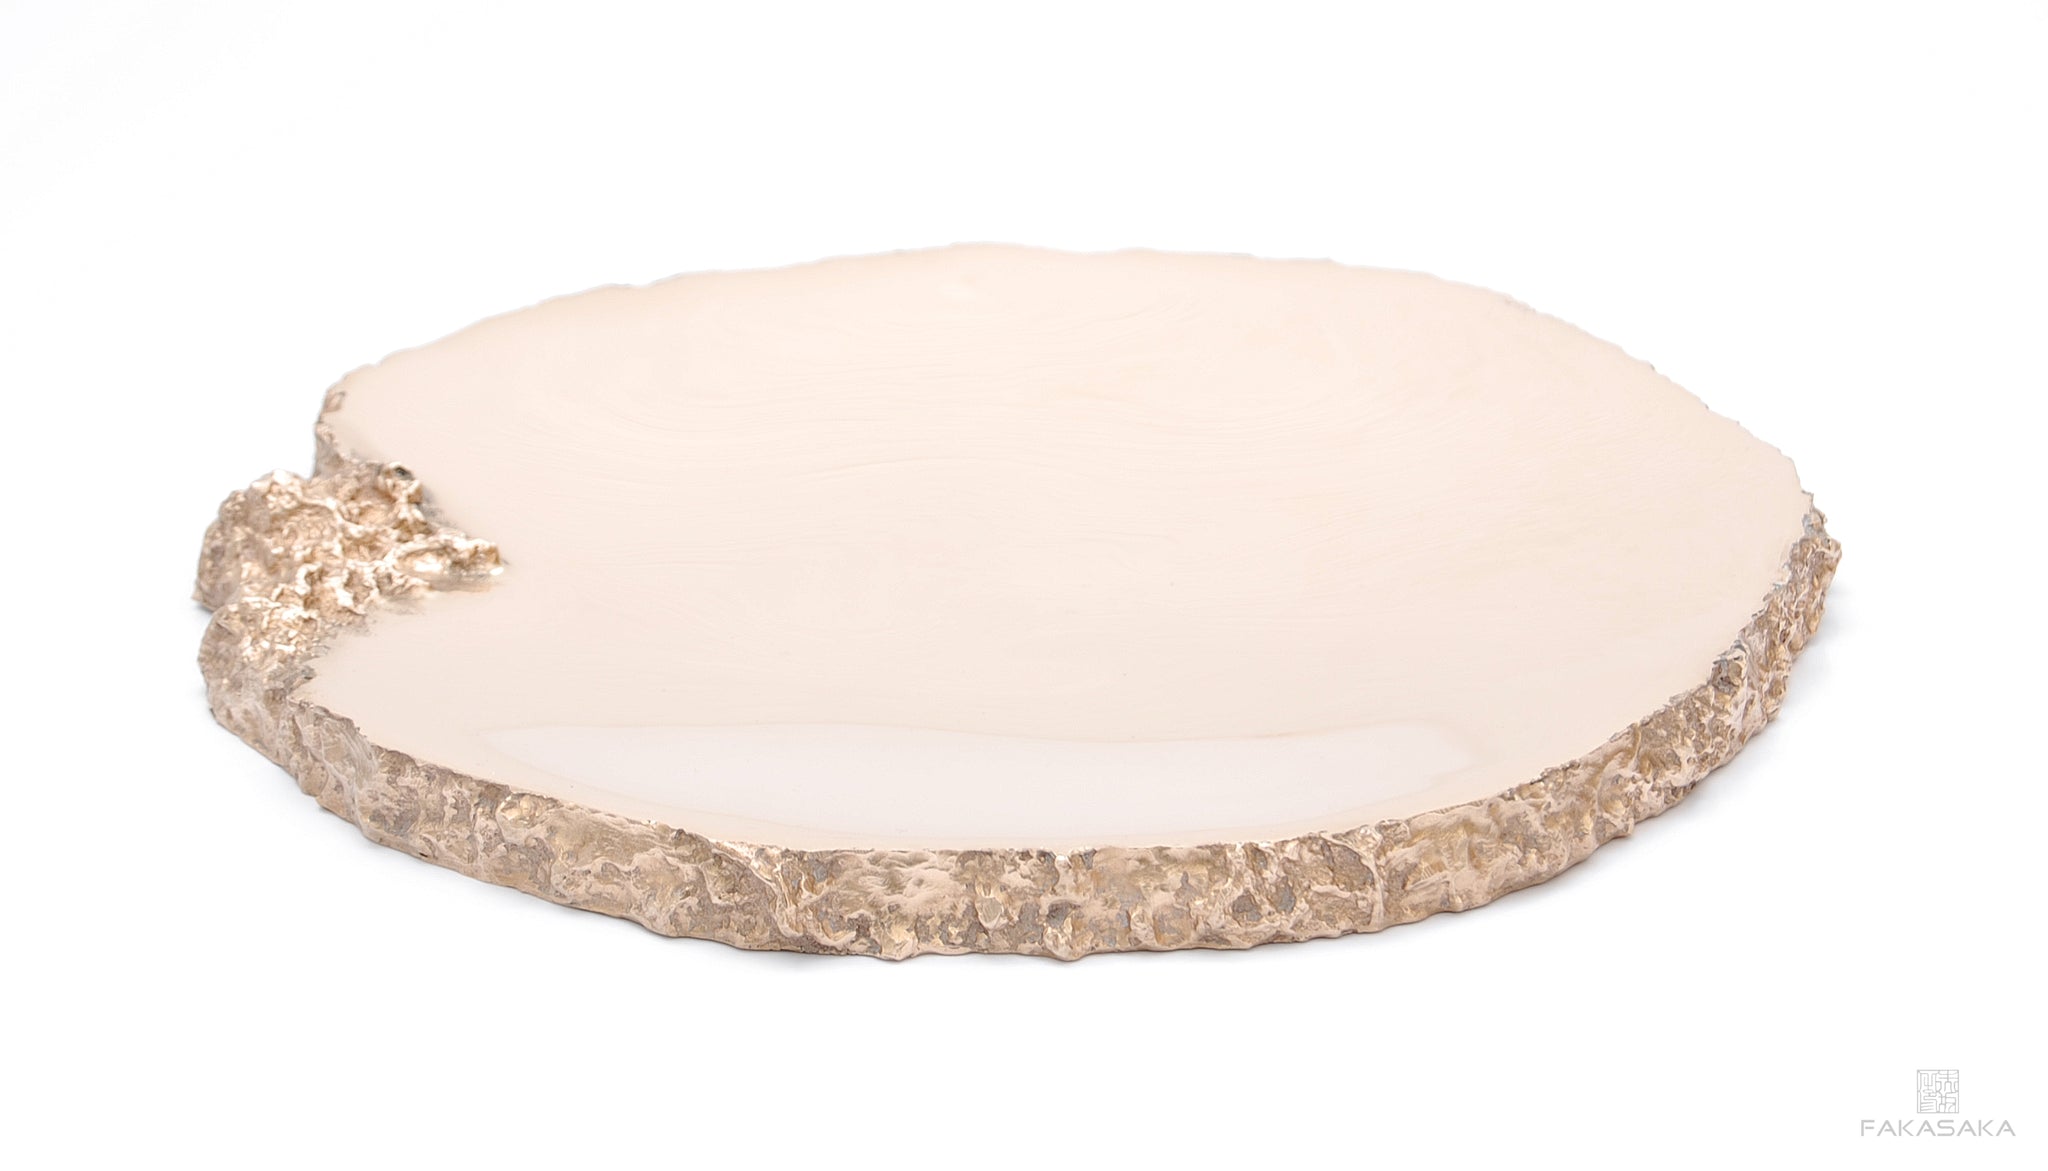 HOPE <br><br>ROUND TRAY / CENTERPIECE / CANDLE TRAY<br><br>POLISHED BRONZE